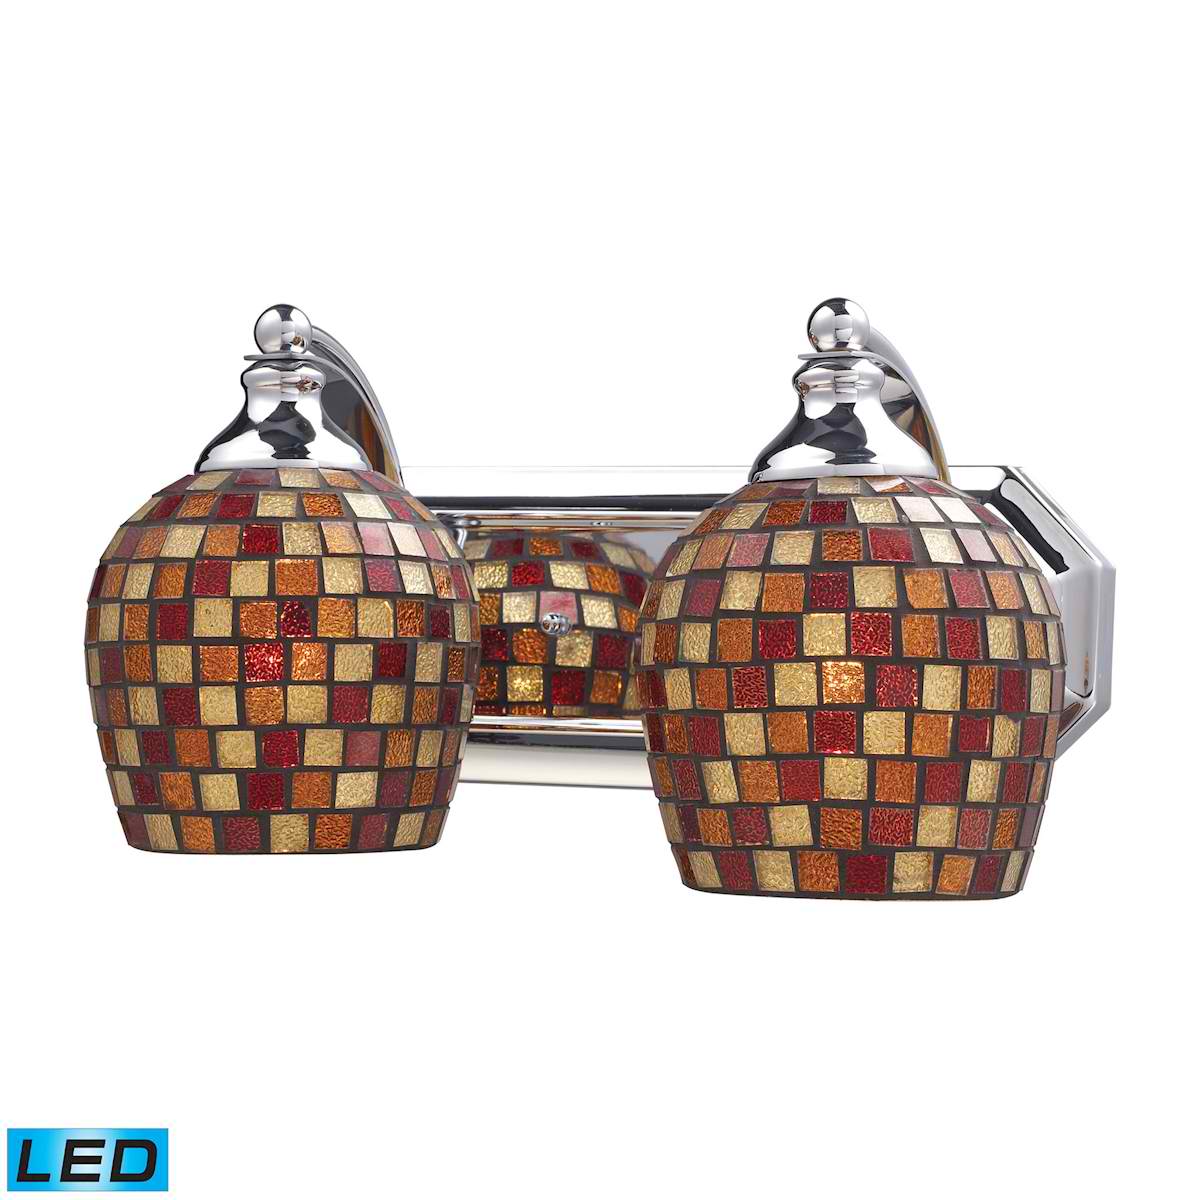 2 Light Vanity in Polished Chrome and Multi Mosaic Glass - LED, 800 Lumens (1600 Lumens Total) With Full Scale